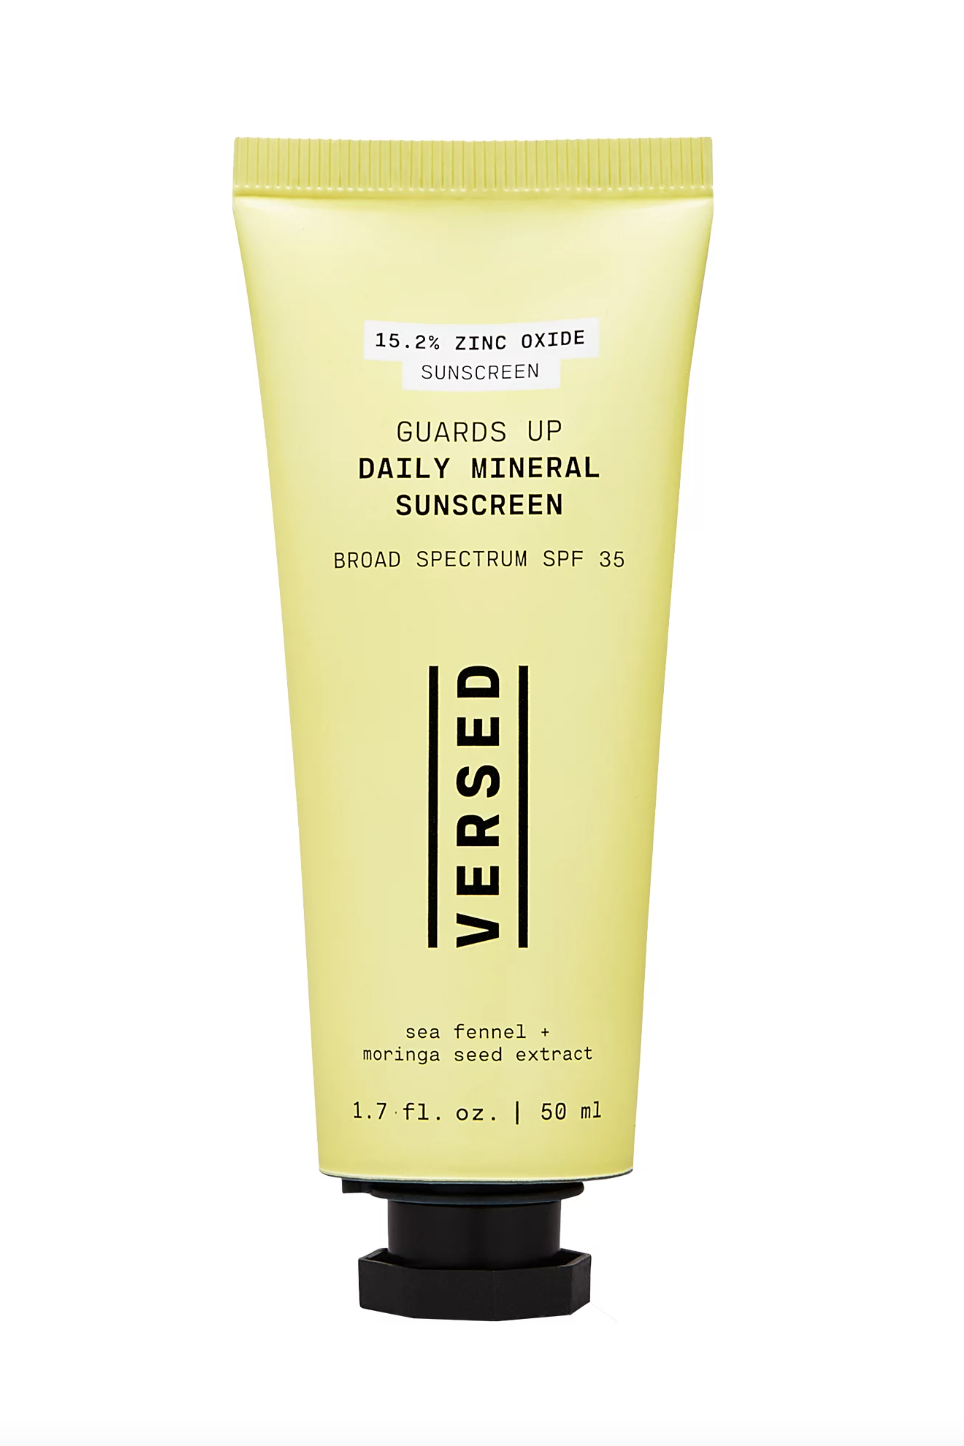 Guards Up Daily Mineral Sunscreen Broad Spectrum Spf 35